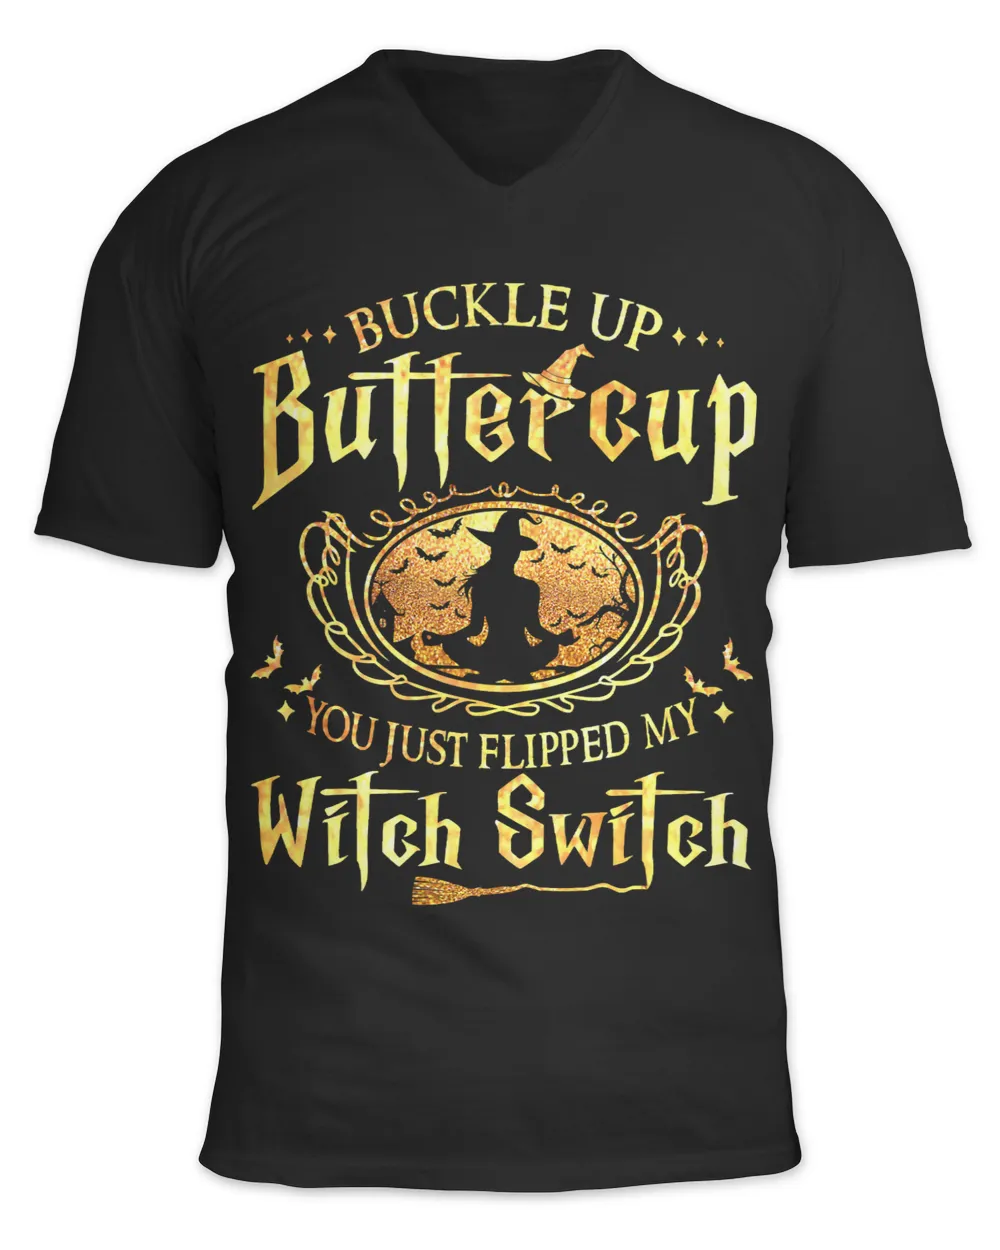 Buckle Up Buttercup You Just Flipped My Witch Switch Yoga